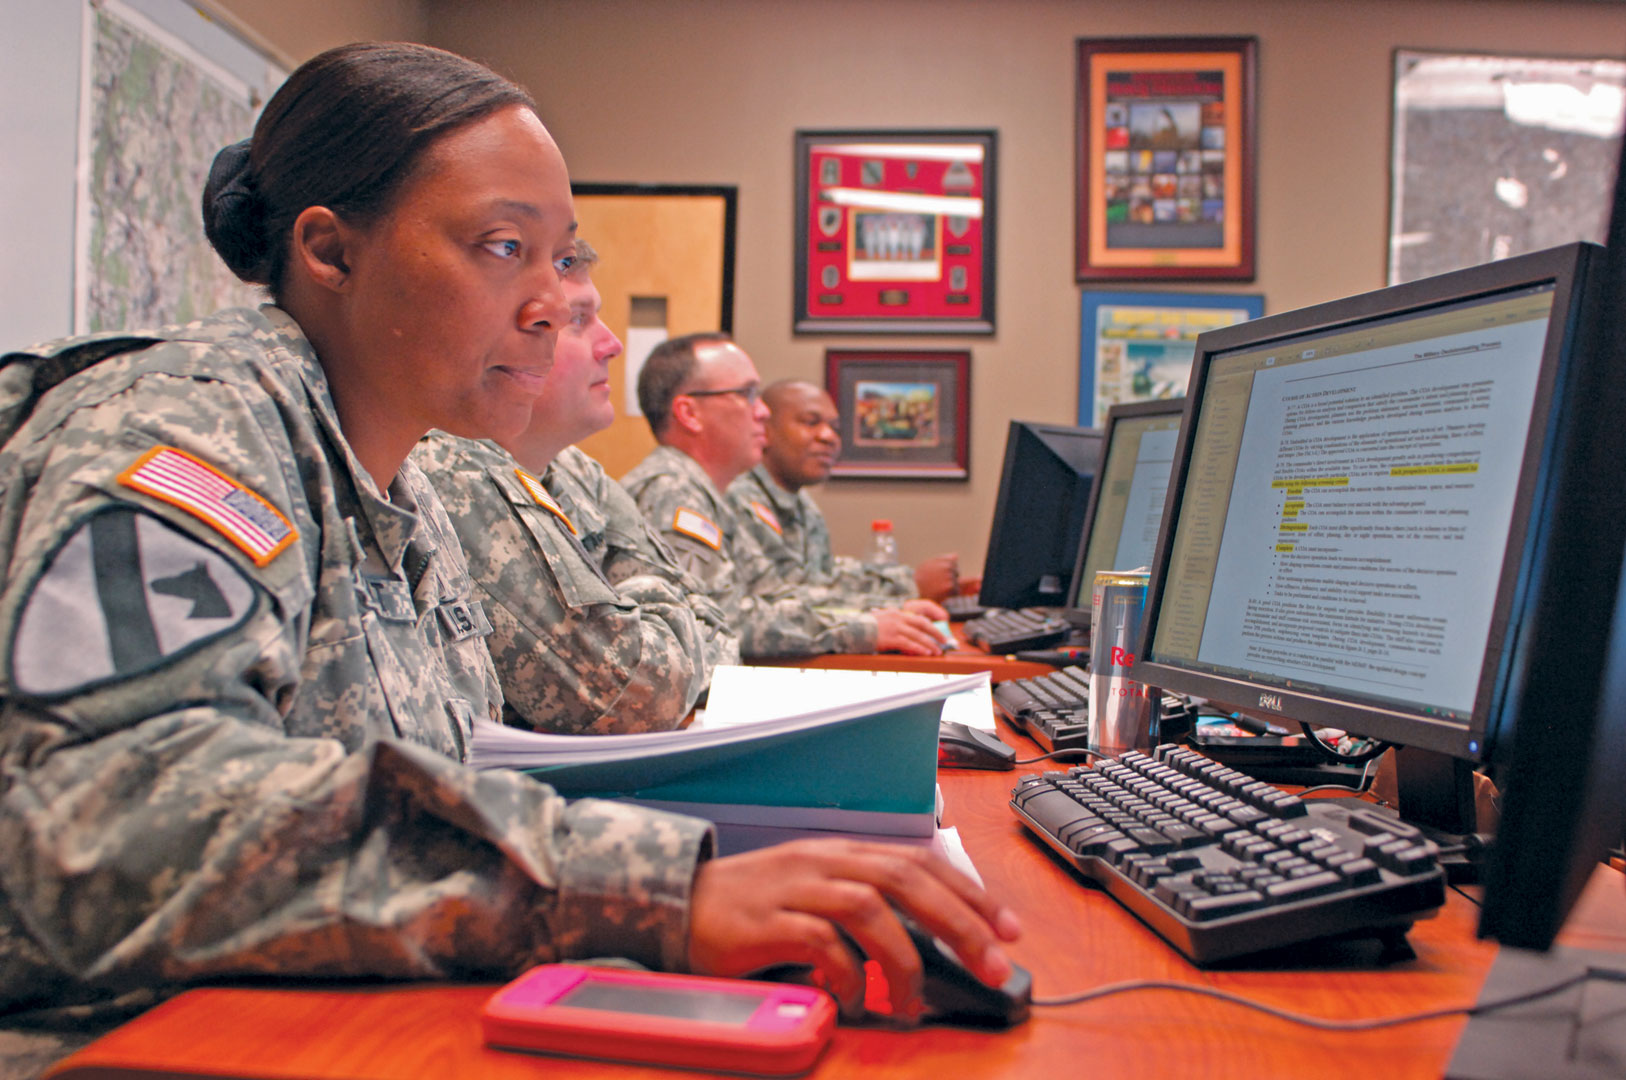 Staff Sgt. Chantel Duhart of the 1st Stryker Brigade Combat Team, 1st Armored Division, reviews course work during a resident Battle Staff NCO Course class at the U.S. Army Sergeants Major Academy at Fort Bliss, Texas. (Photo by Staff Sgt. Jason Stadel)
